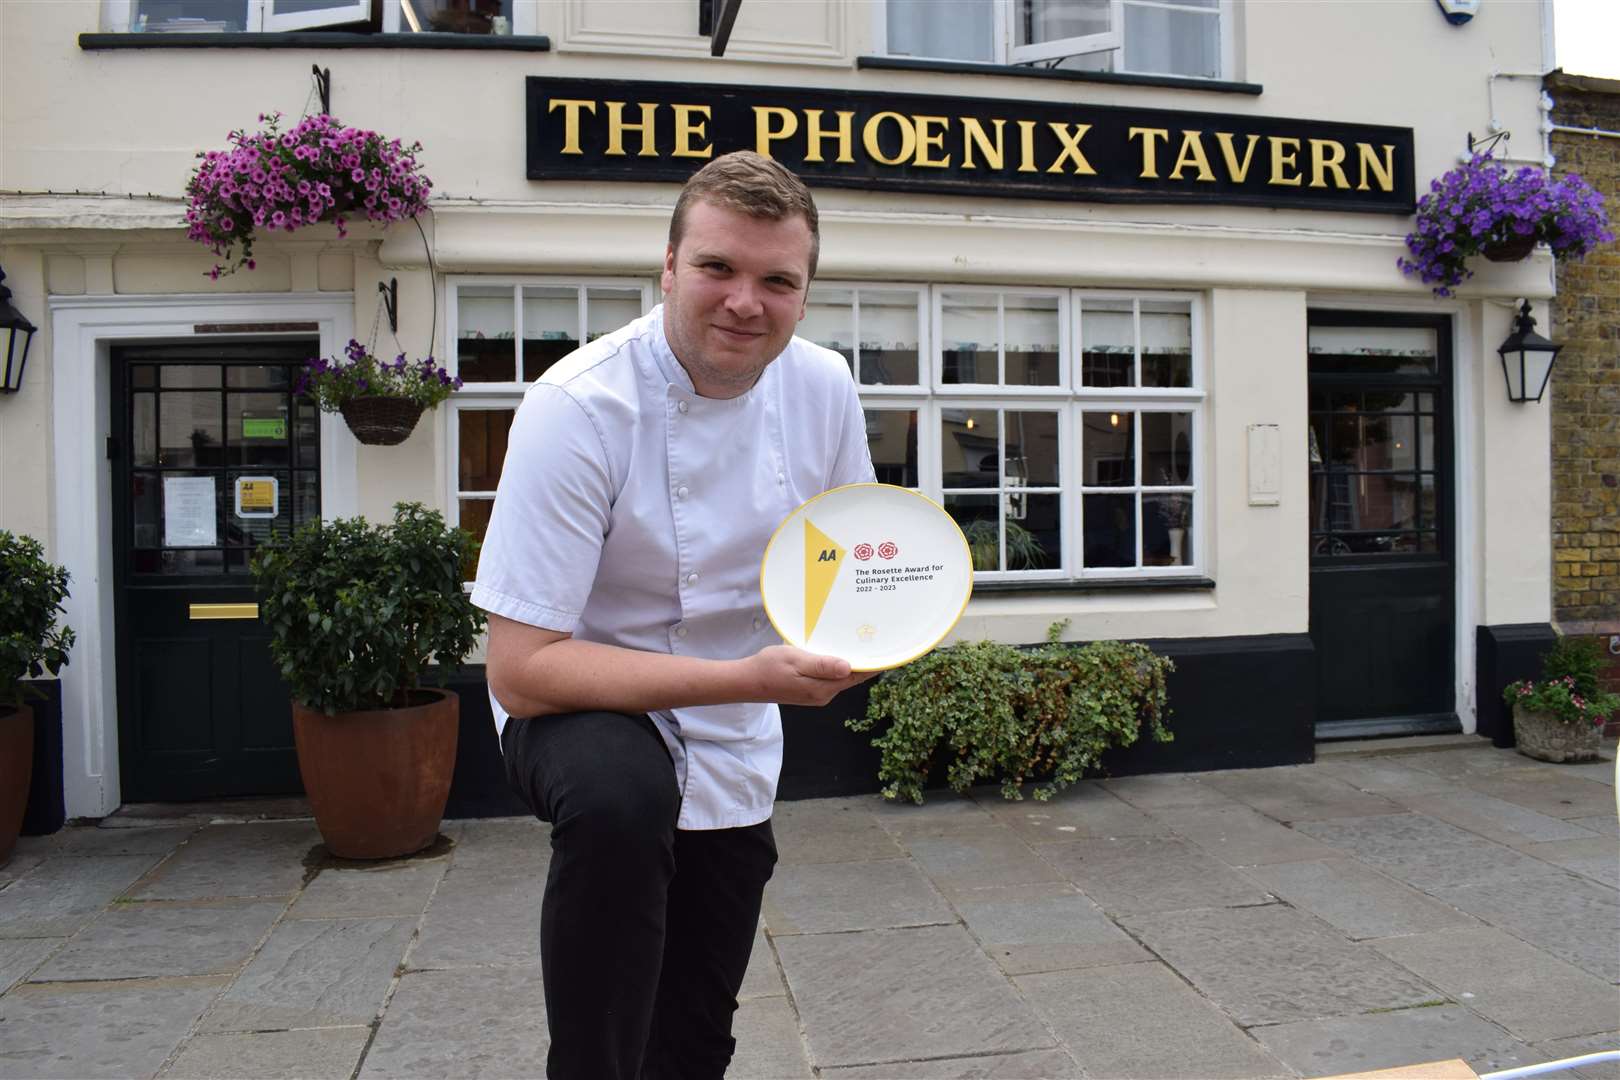 Scott Pendry of The Phoenix Tavern in Faversham is proud of his “creative, bold and exciting” menu